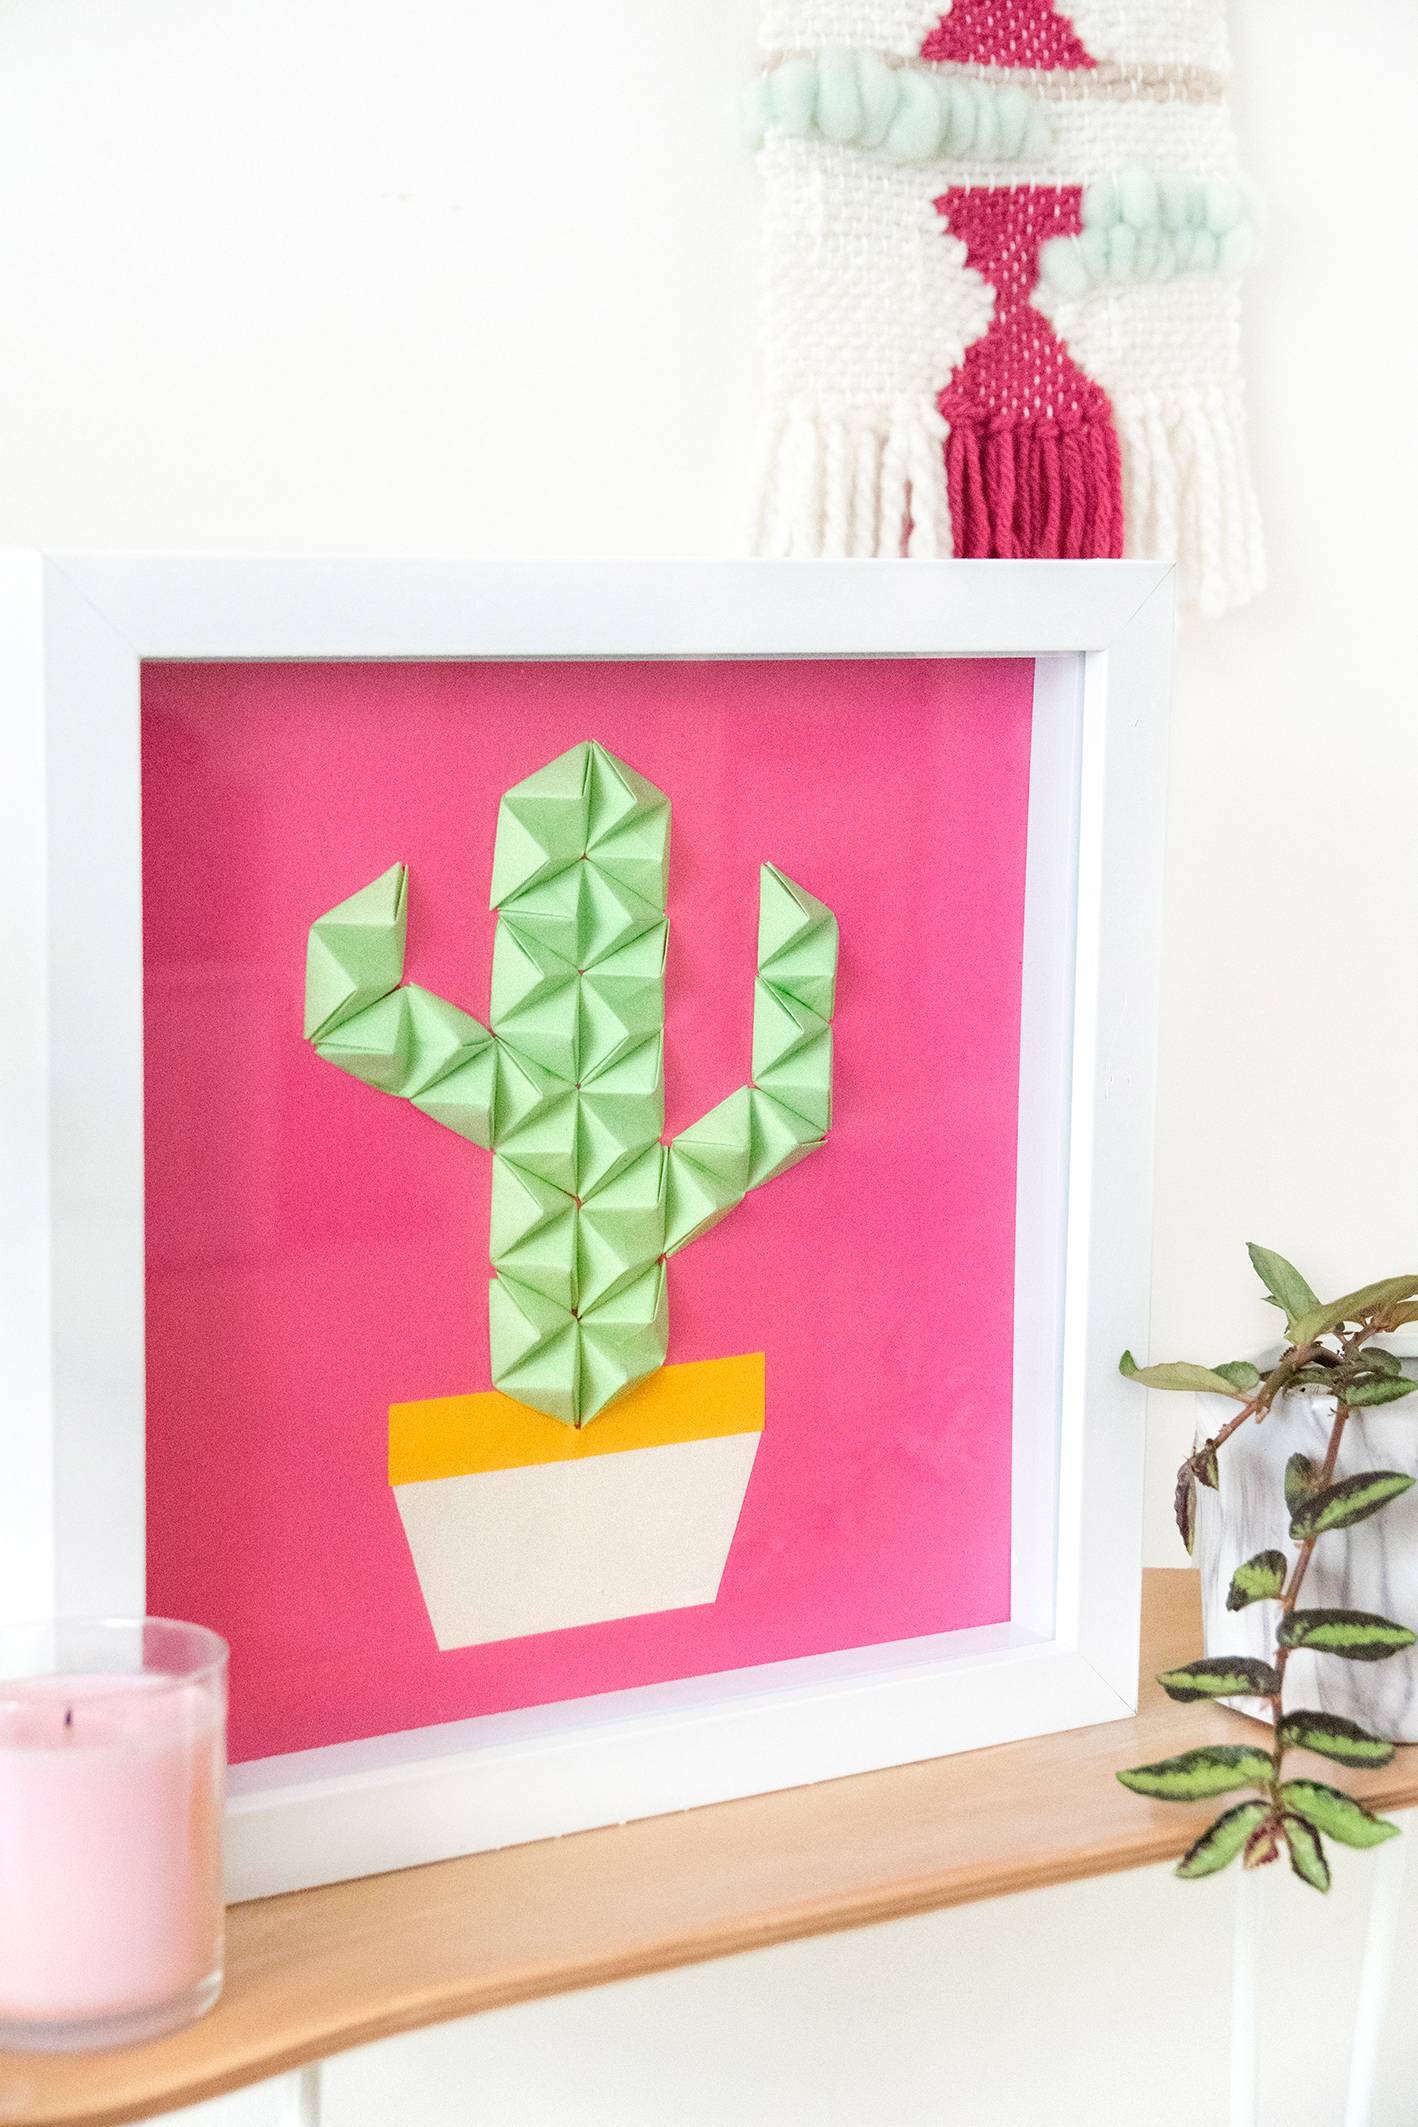 Make this - Easy DIY origami wall art in under half an hour!